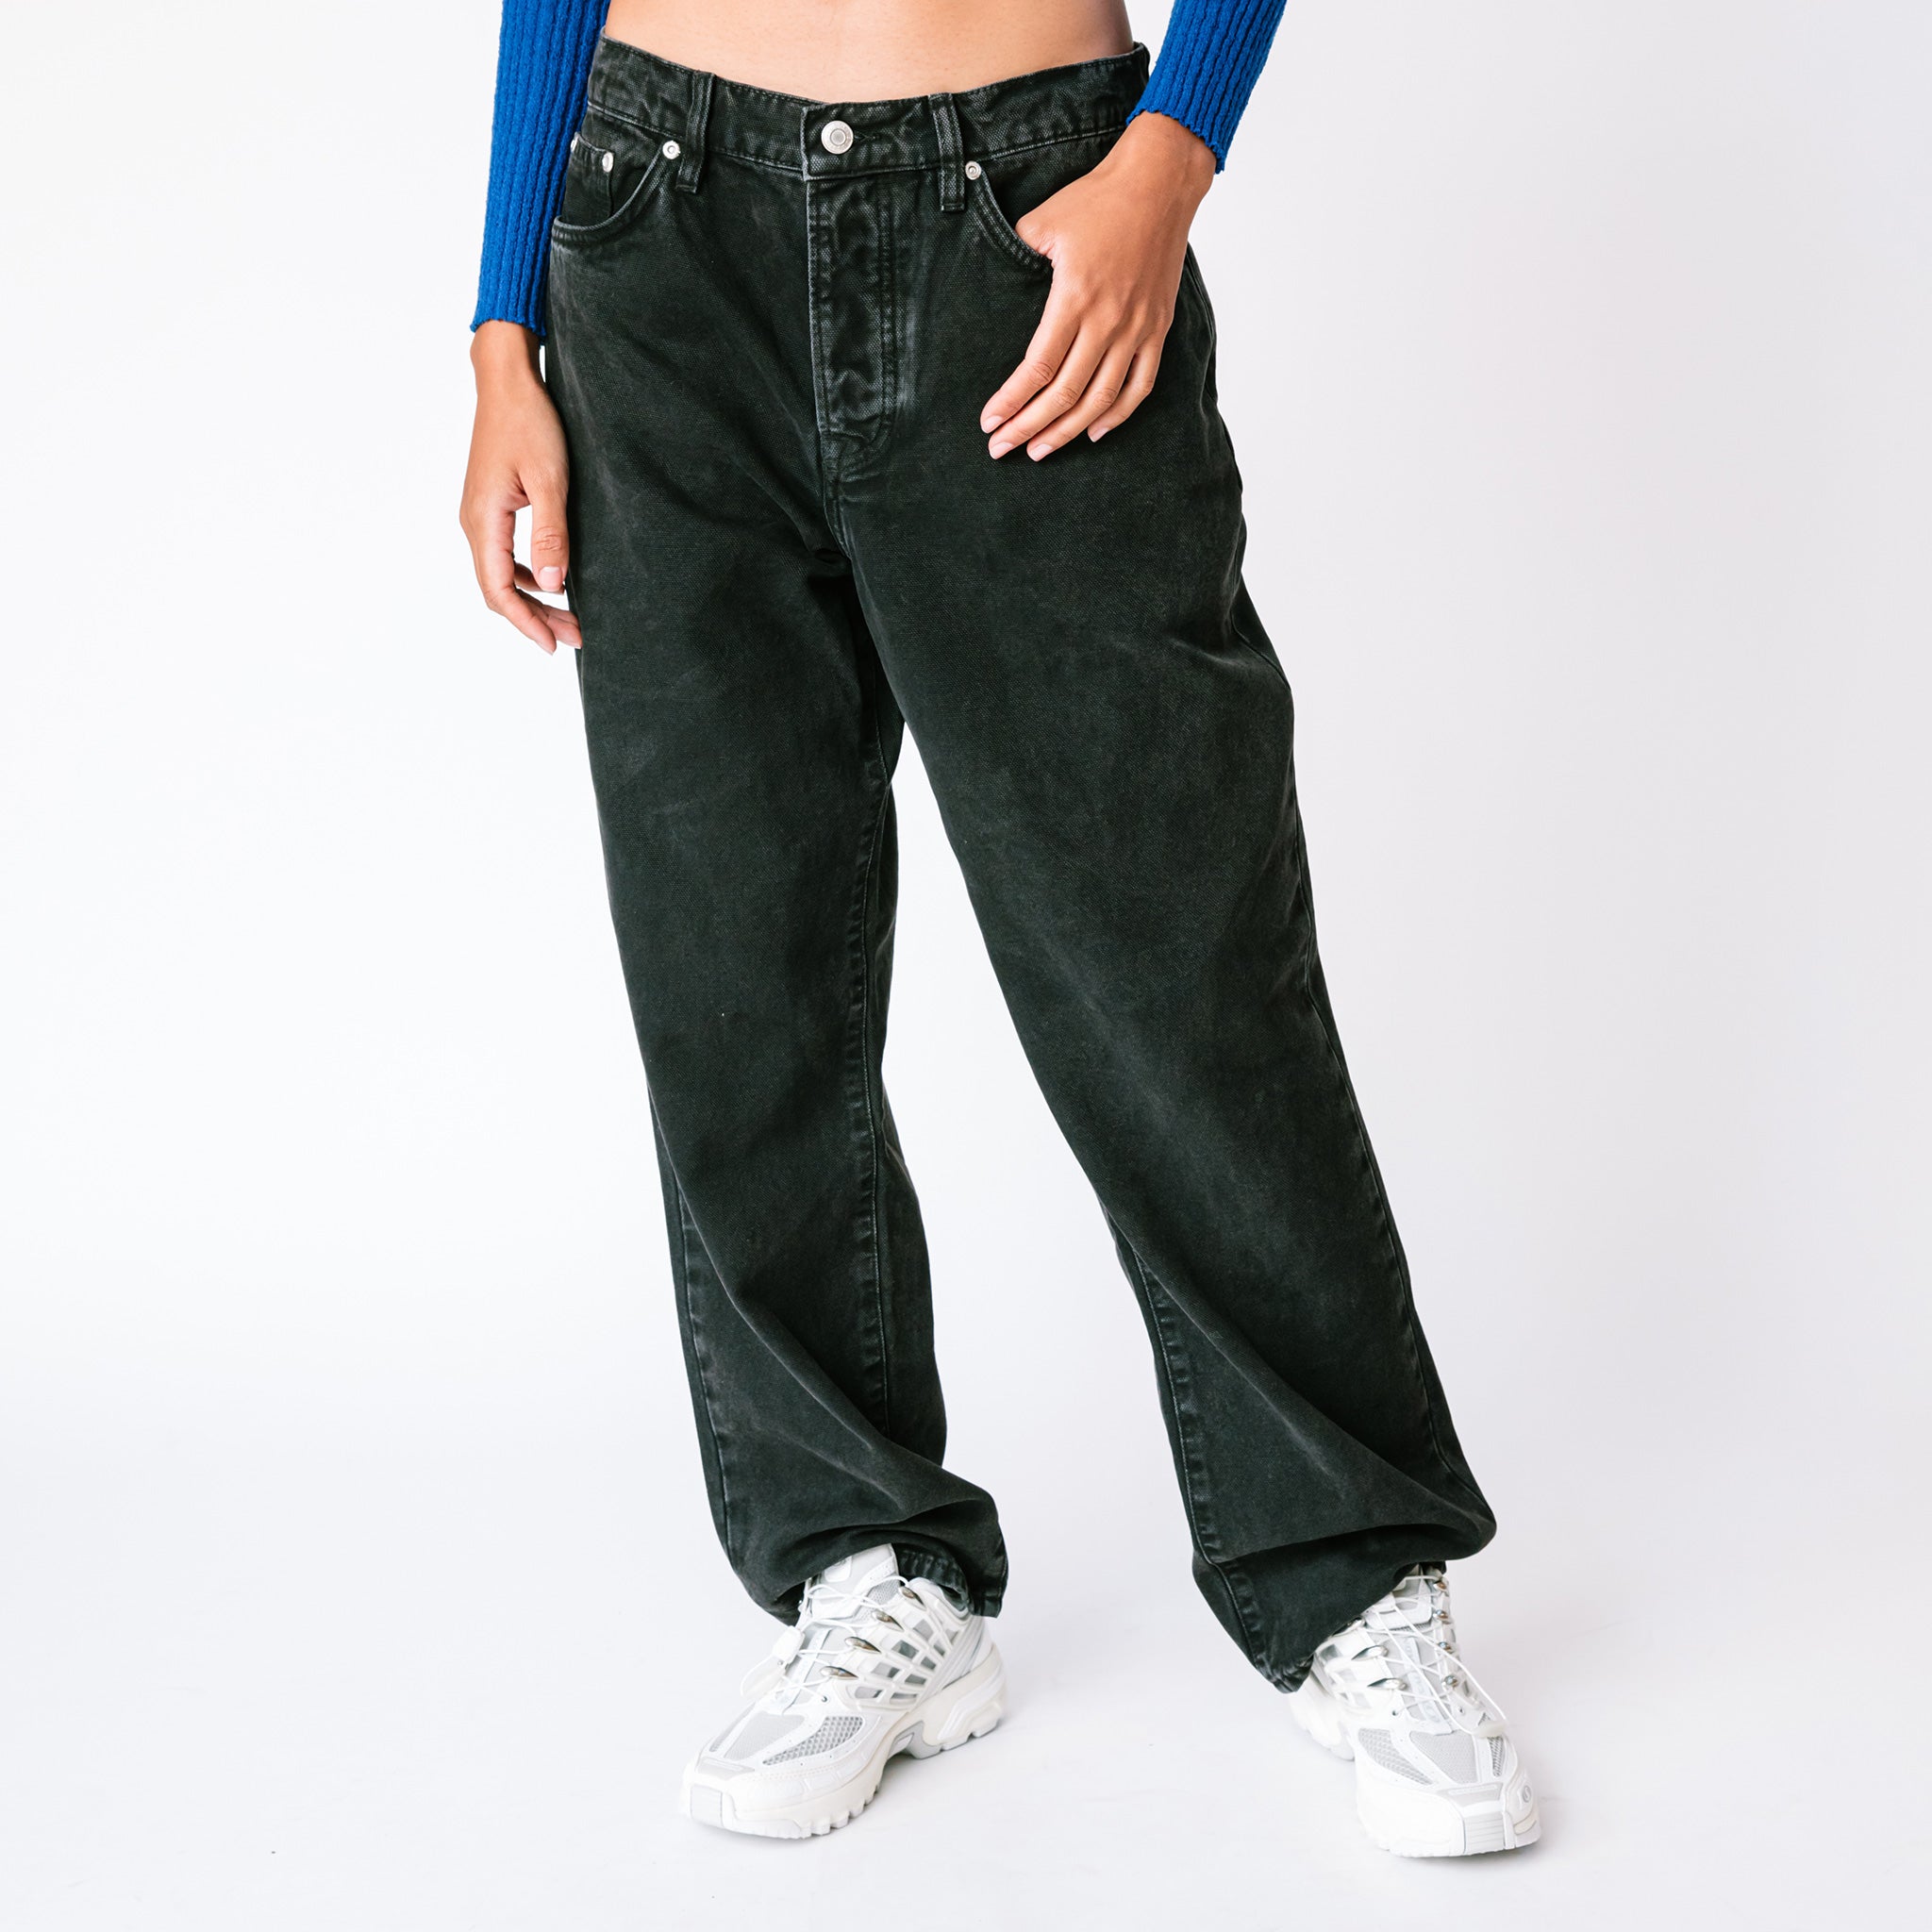 The Big Ol' Jeans in washed black canvas in a baggy fit, paired with a cropped blue sweater and white sneakers.